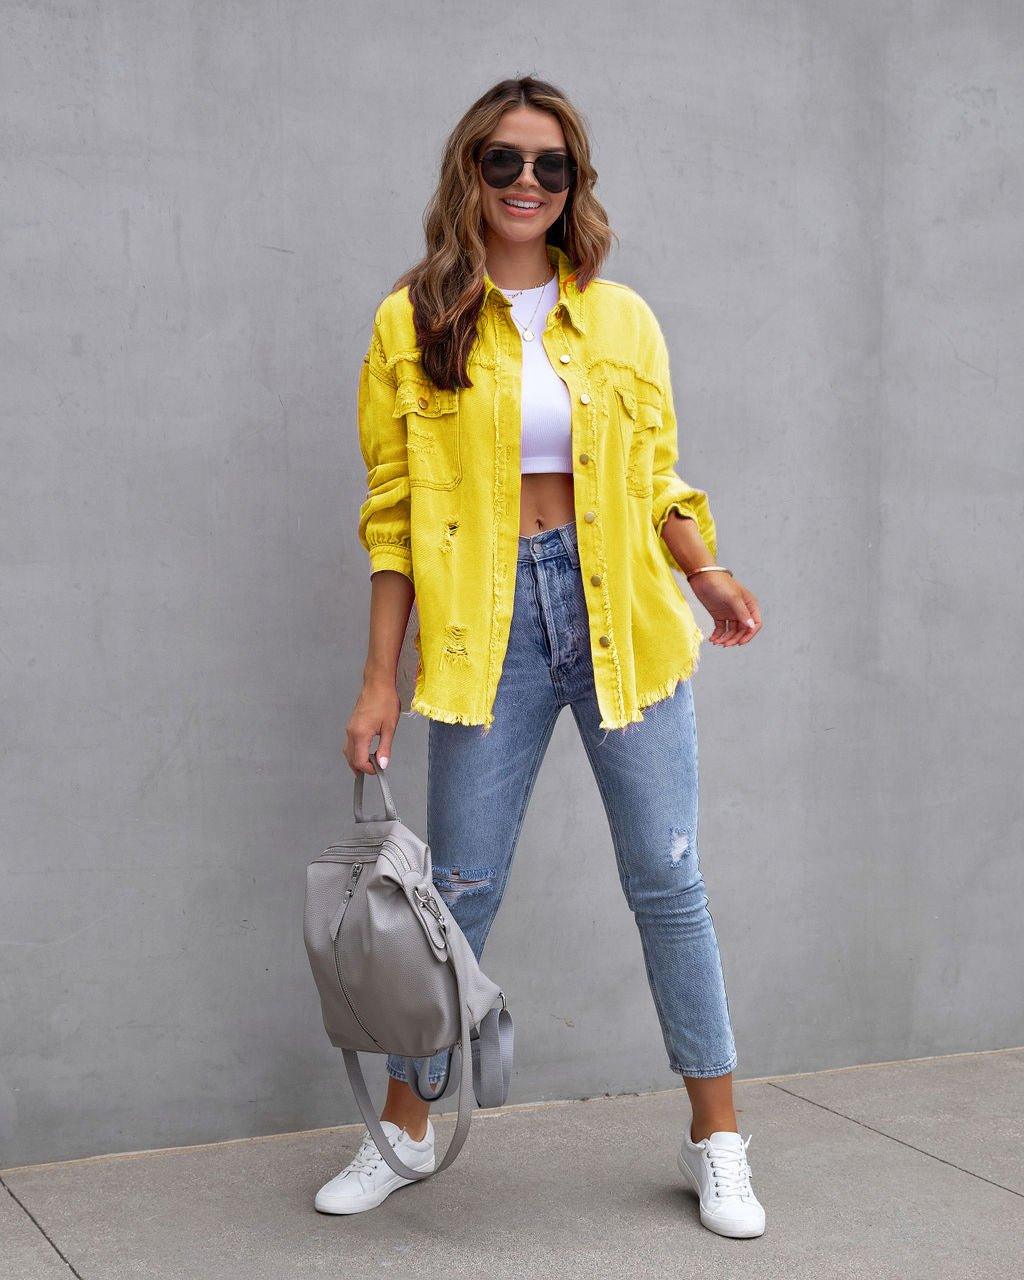 Fashion Ripped Shirt Jacket Female Autumn And Spring Casual Tops Womens Clothing - Comfortably chic